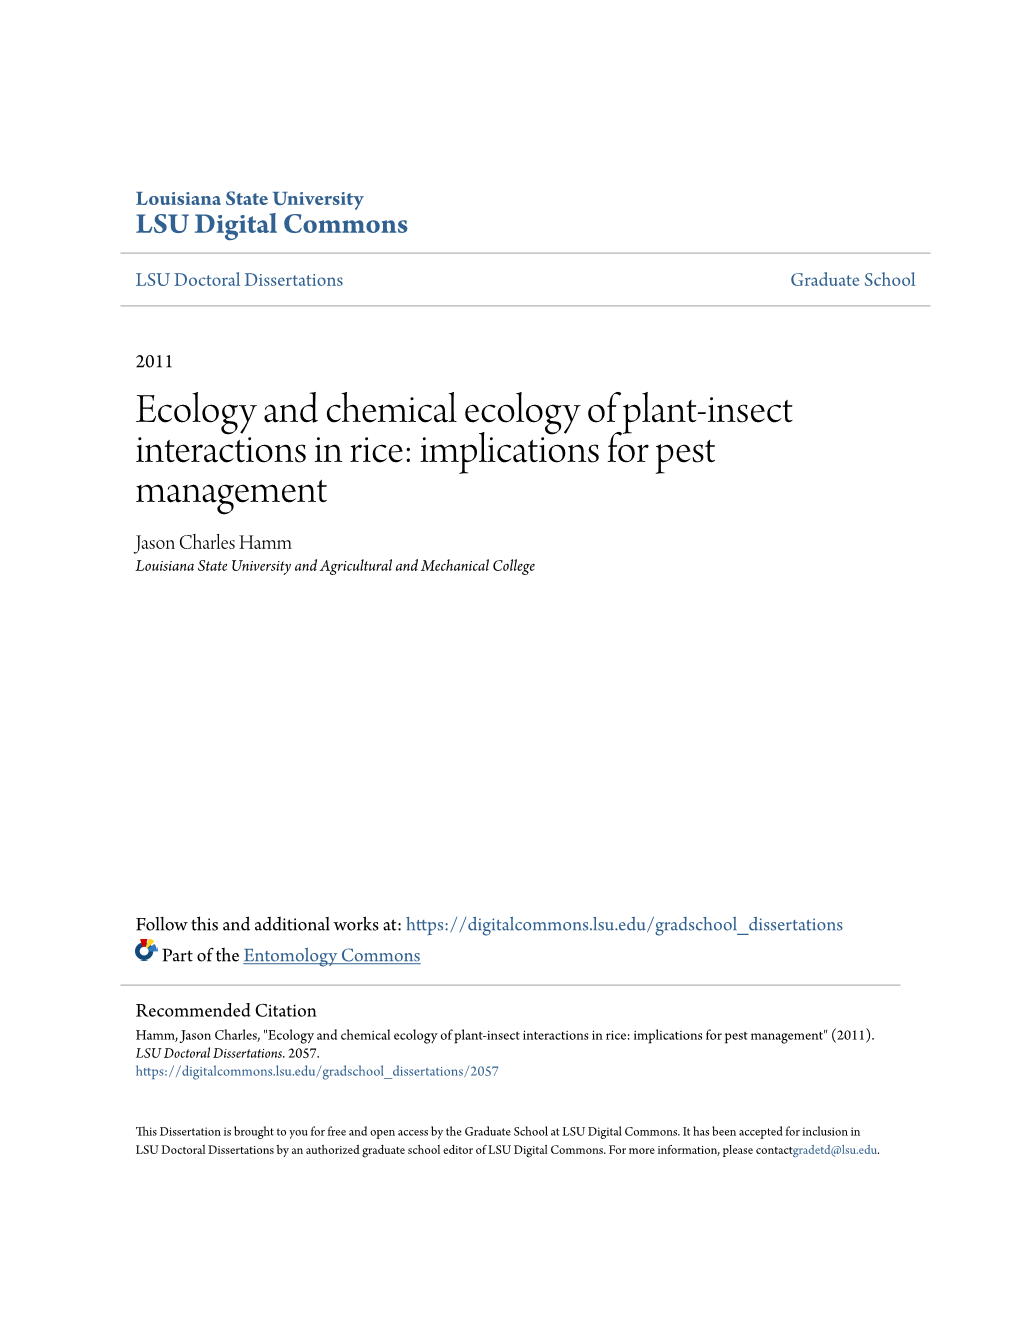 Ecology and Chemical Ecology of Plant-Insect